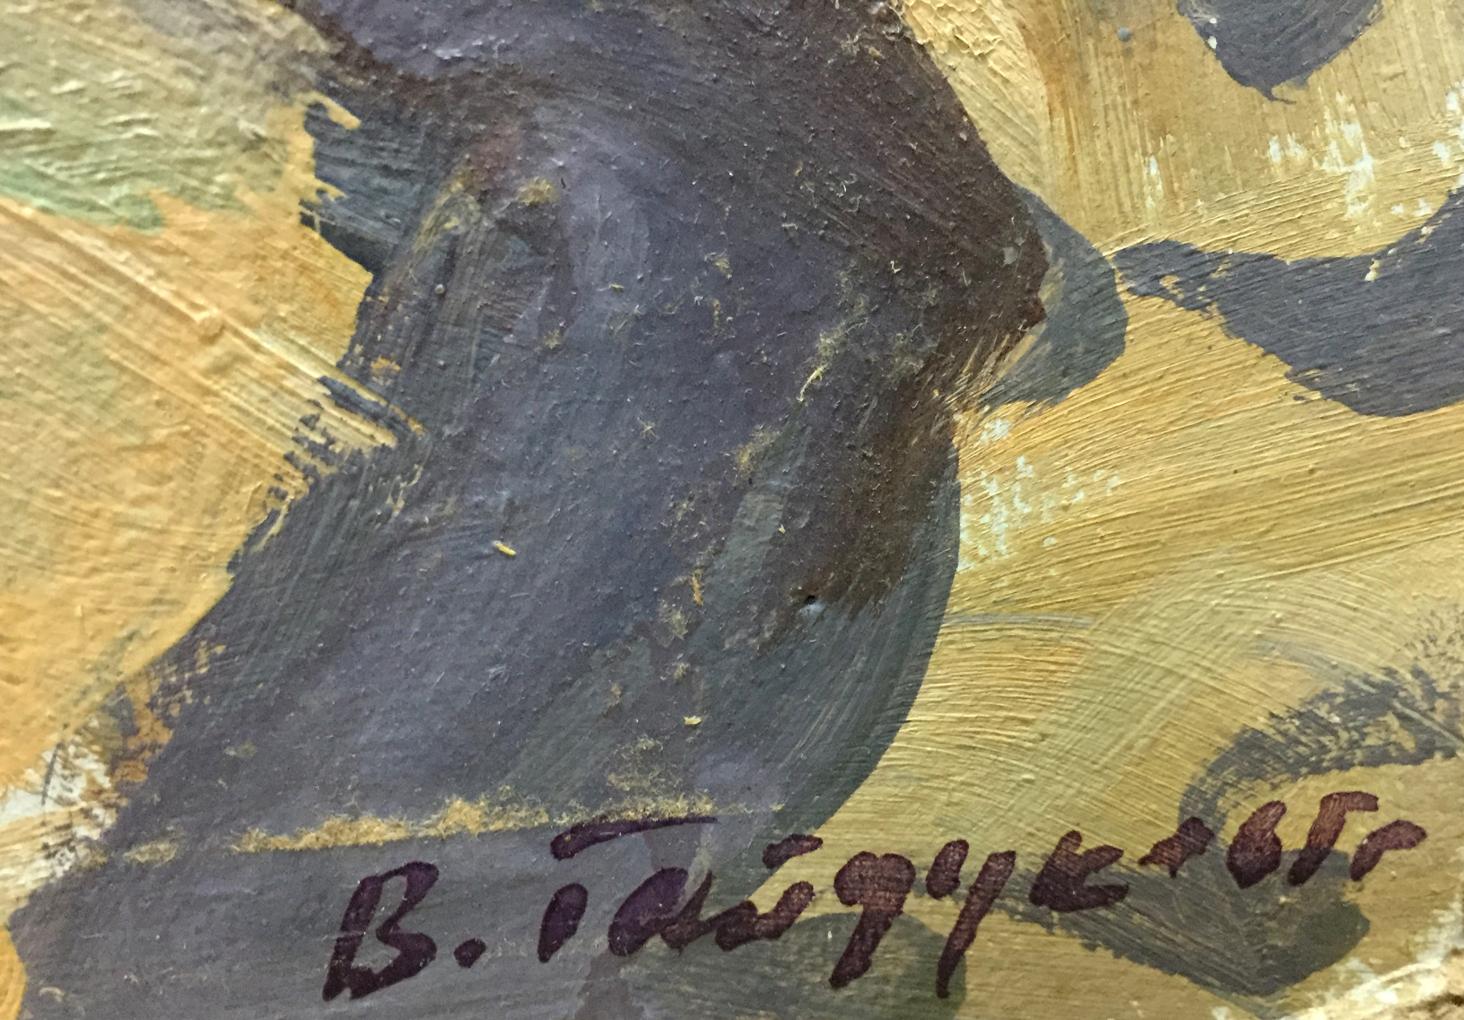 Signature of the painting